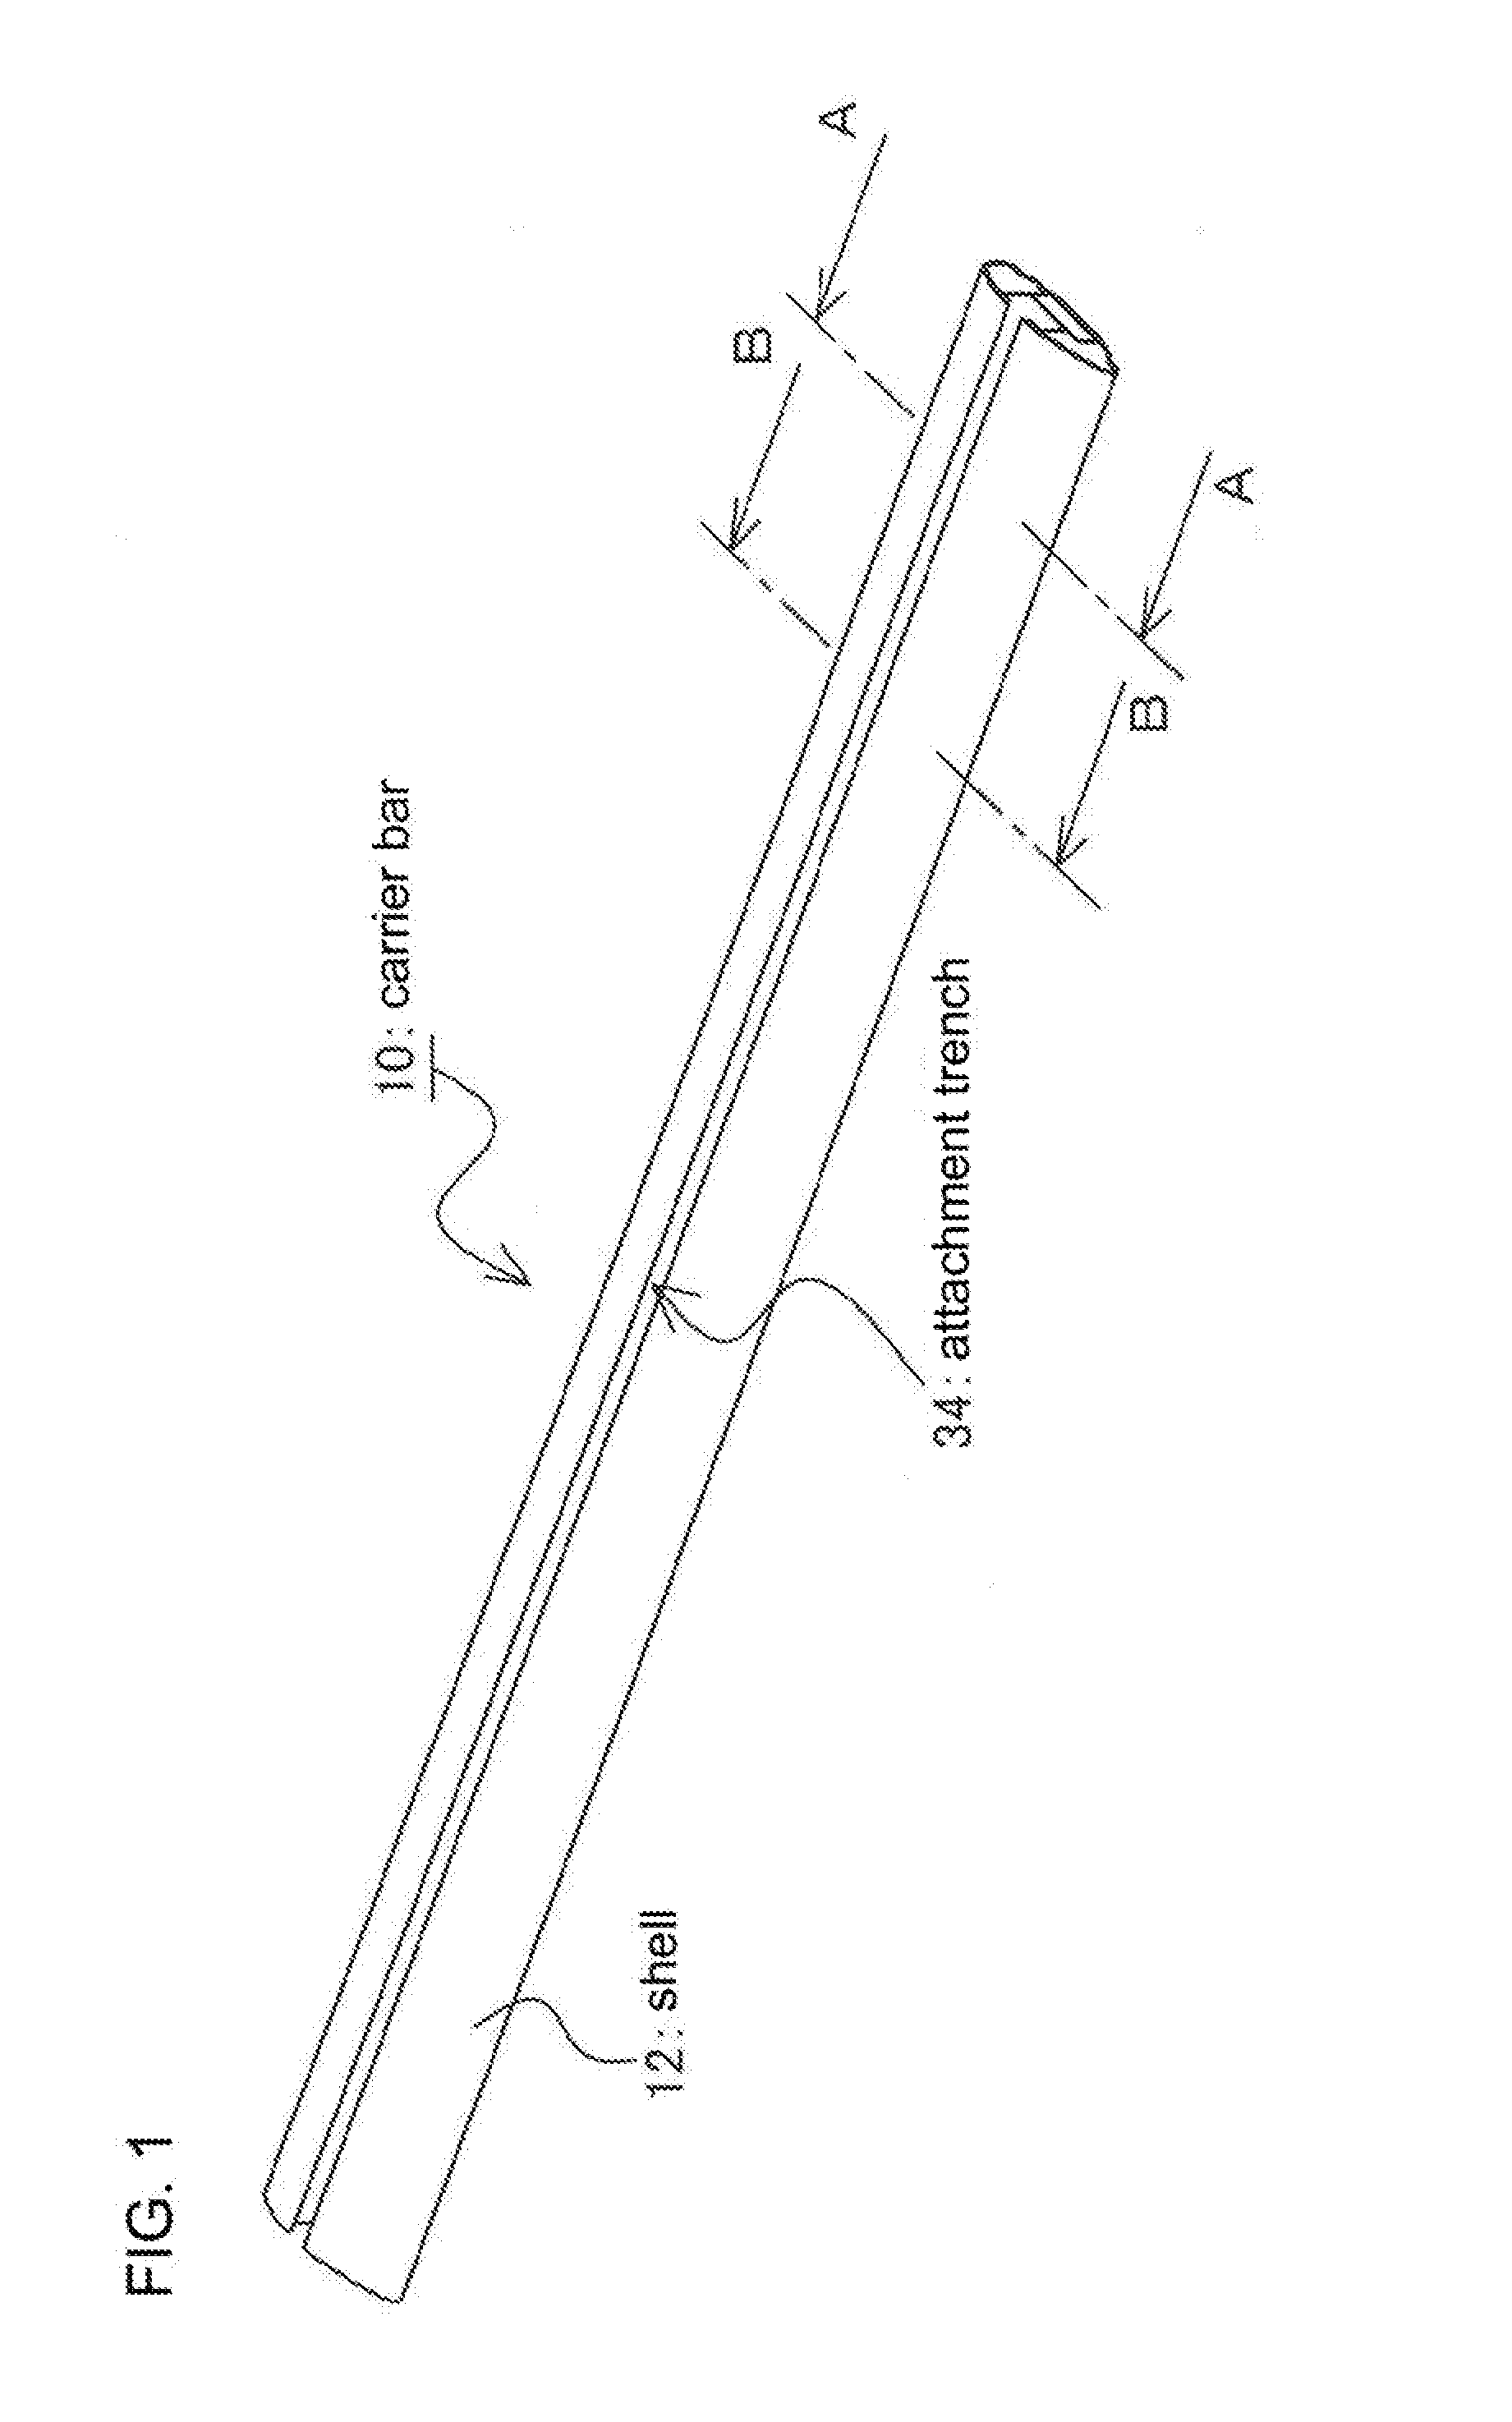 Carrier bar and carrier bar assembly structure